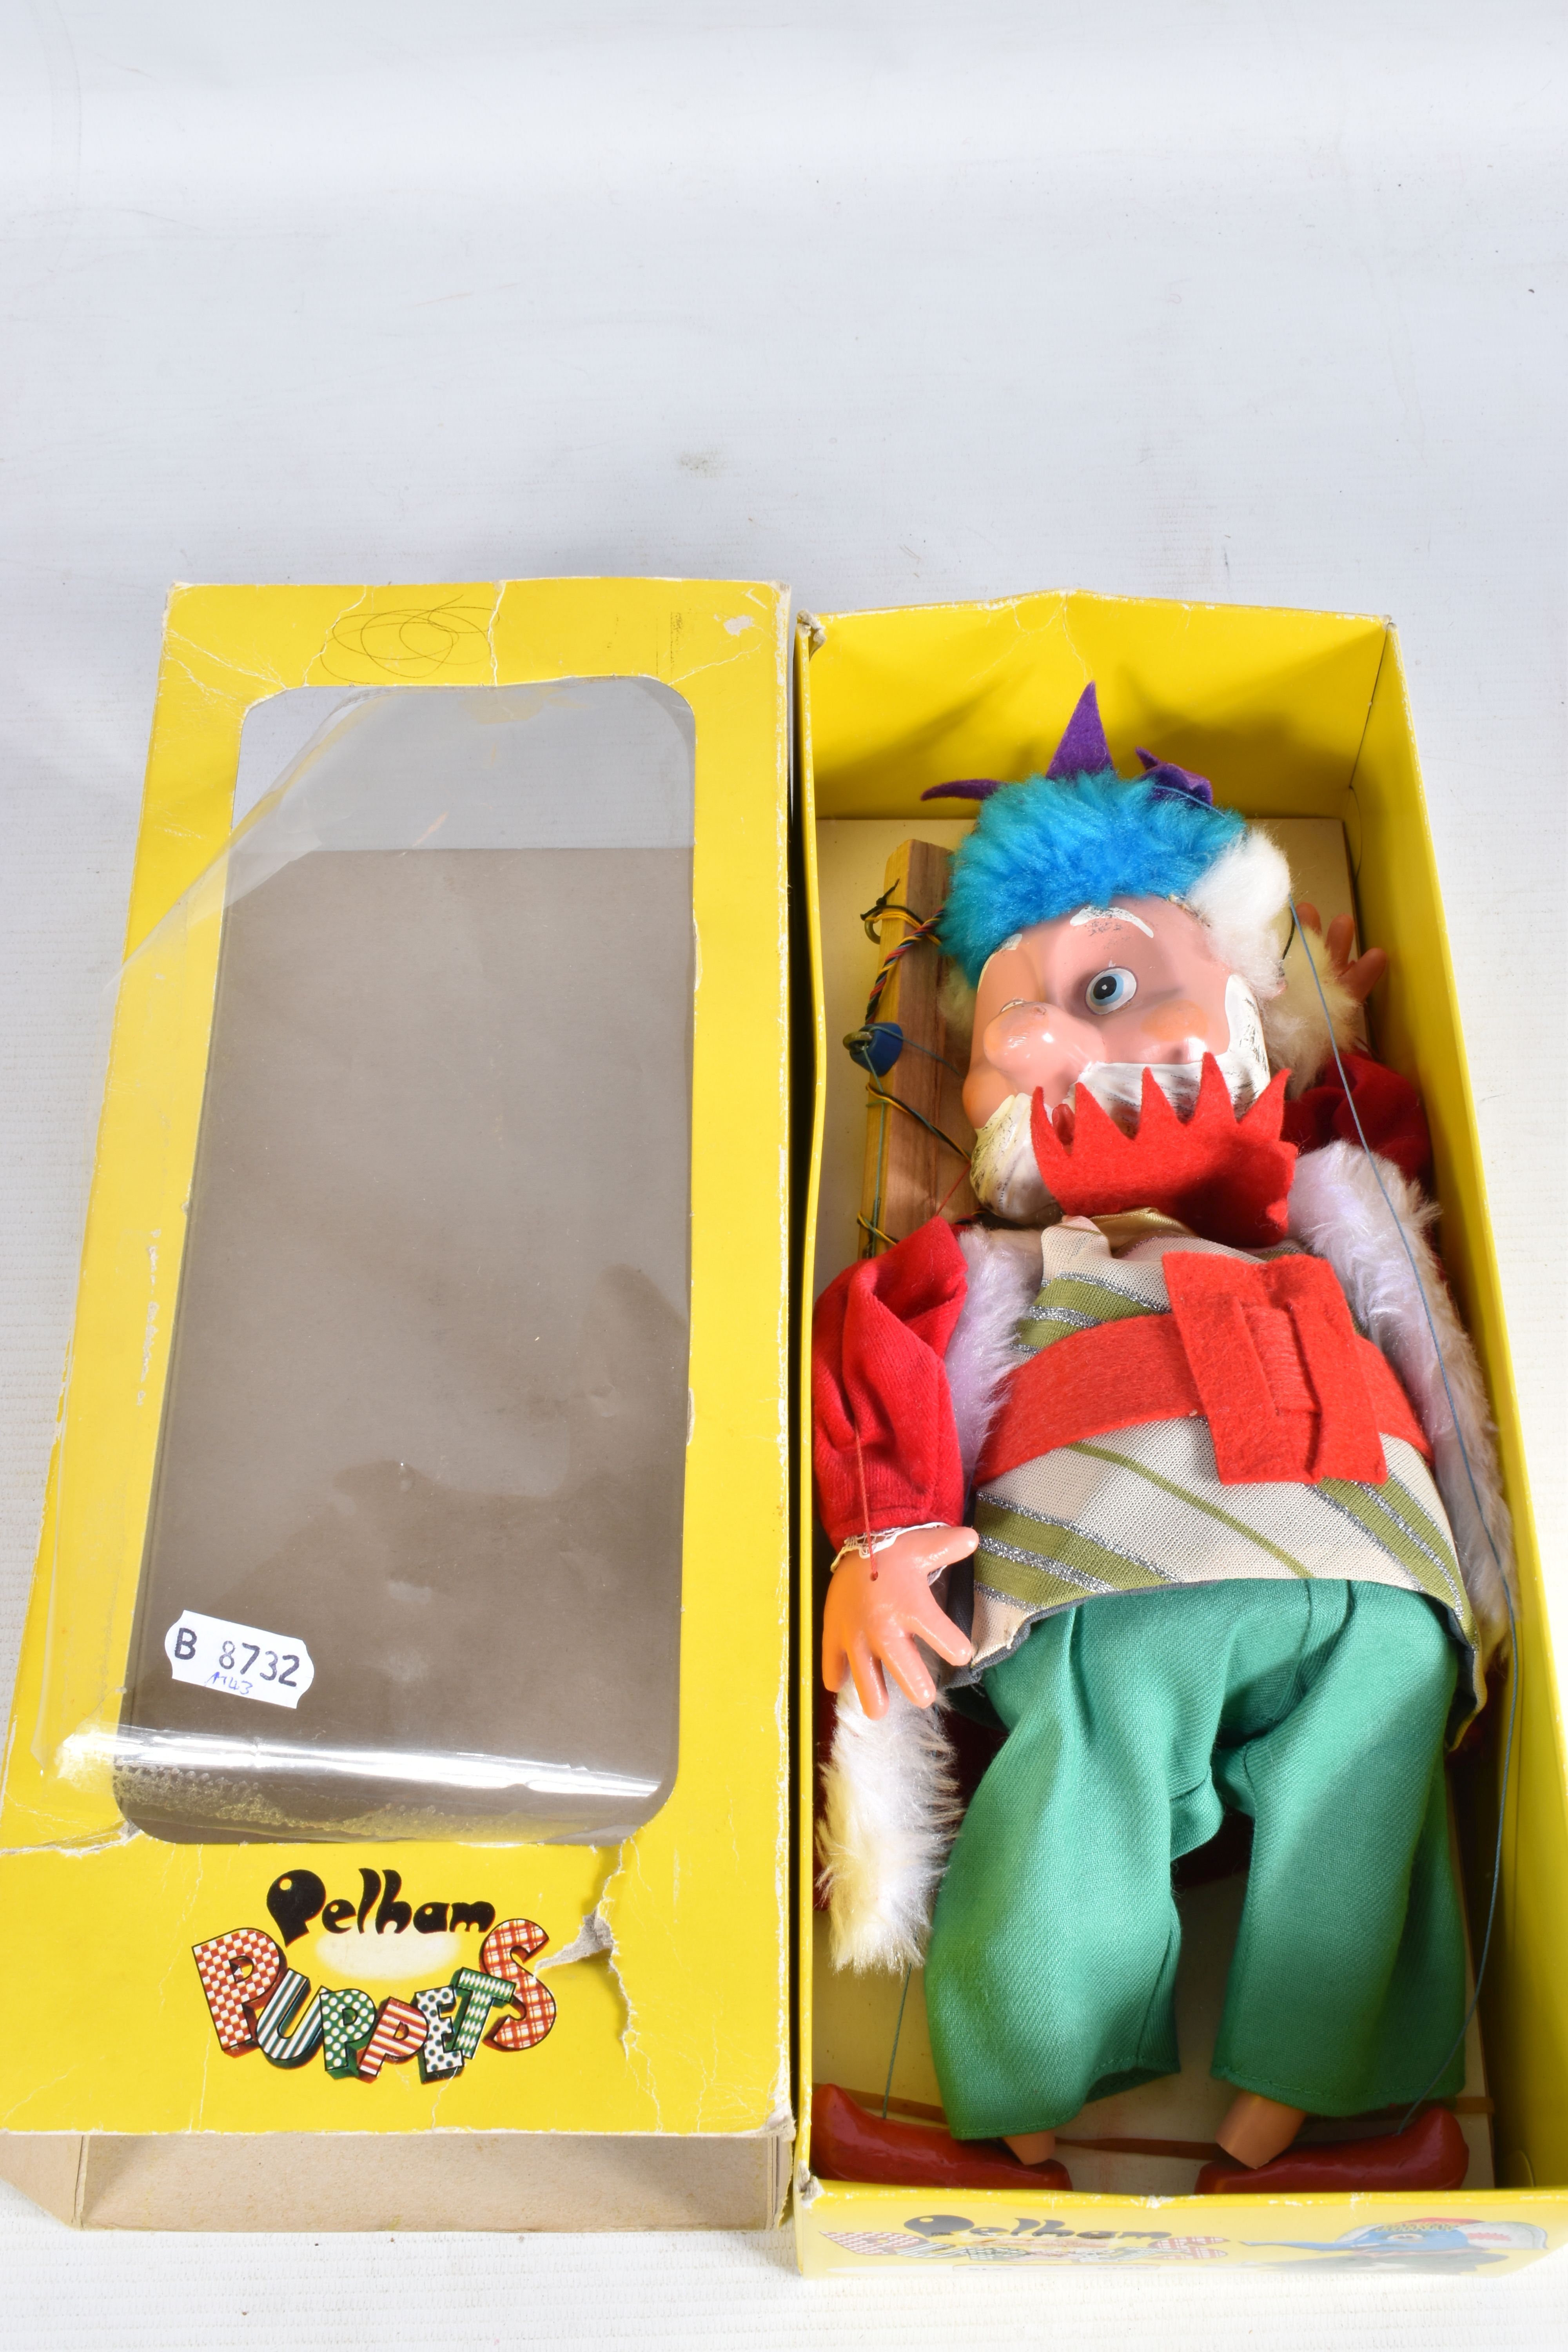 TWO BOXED PELHAM SL63 PUPPETS, Queen and King, versions without label to clothing, both appear - Image 8 of 16